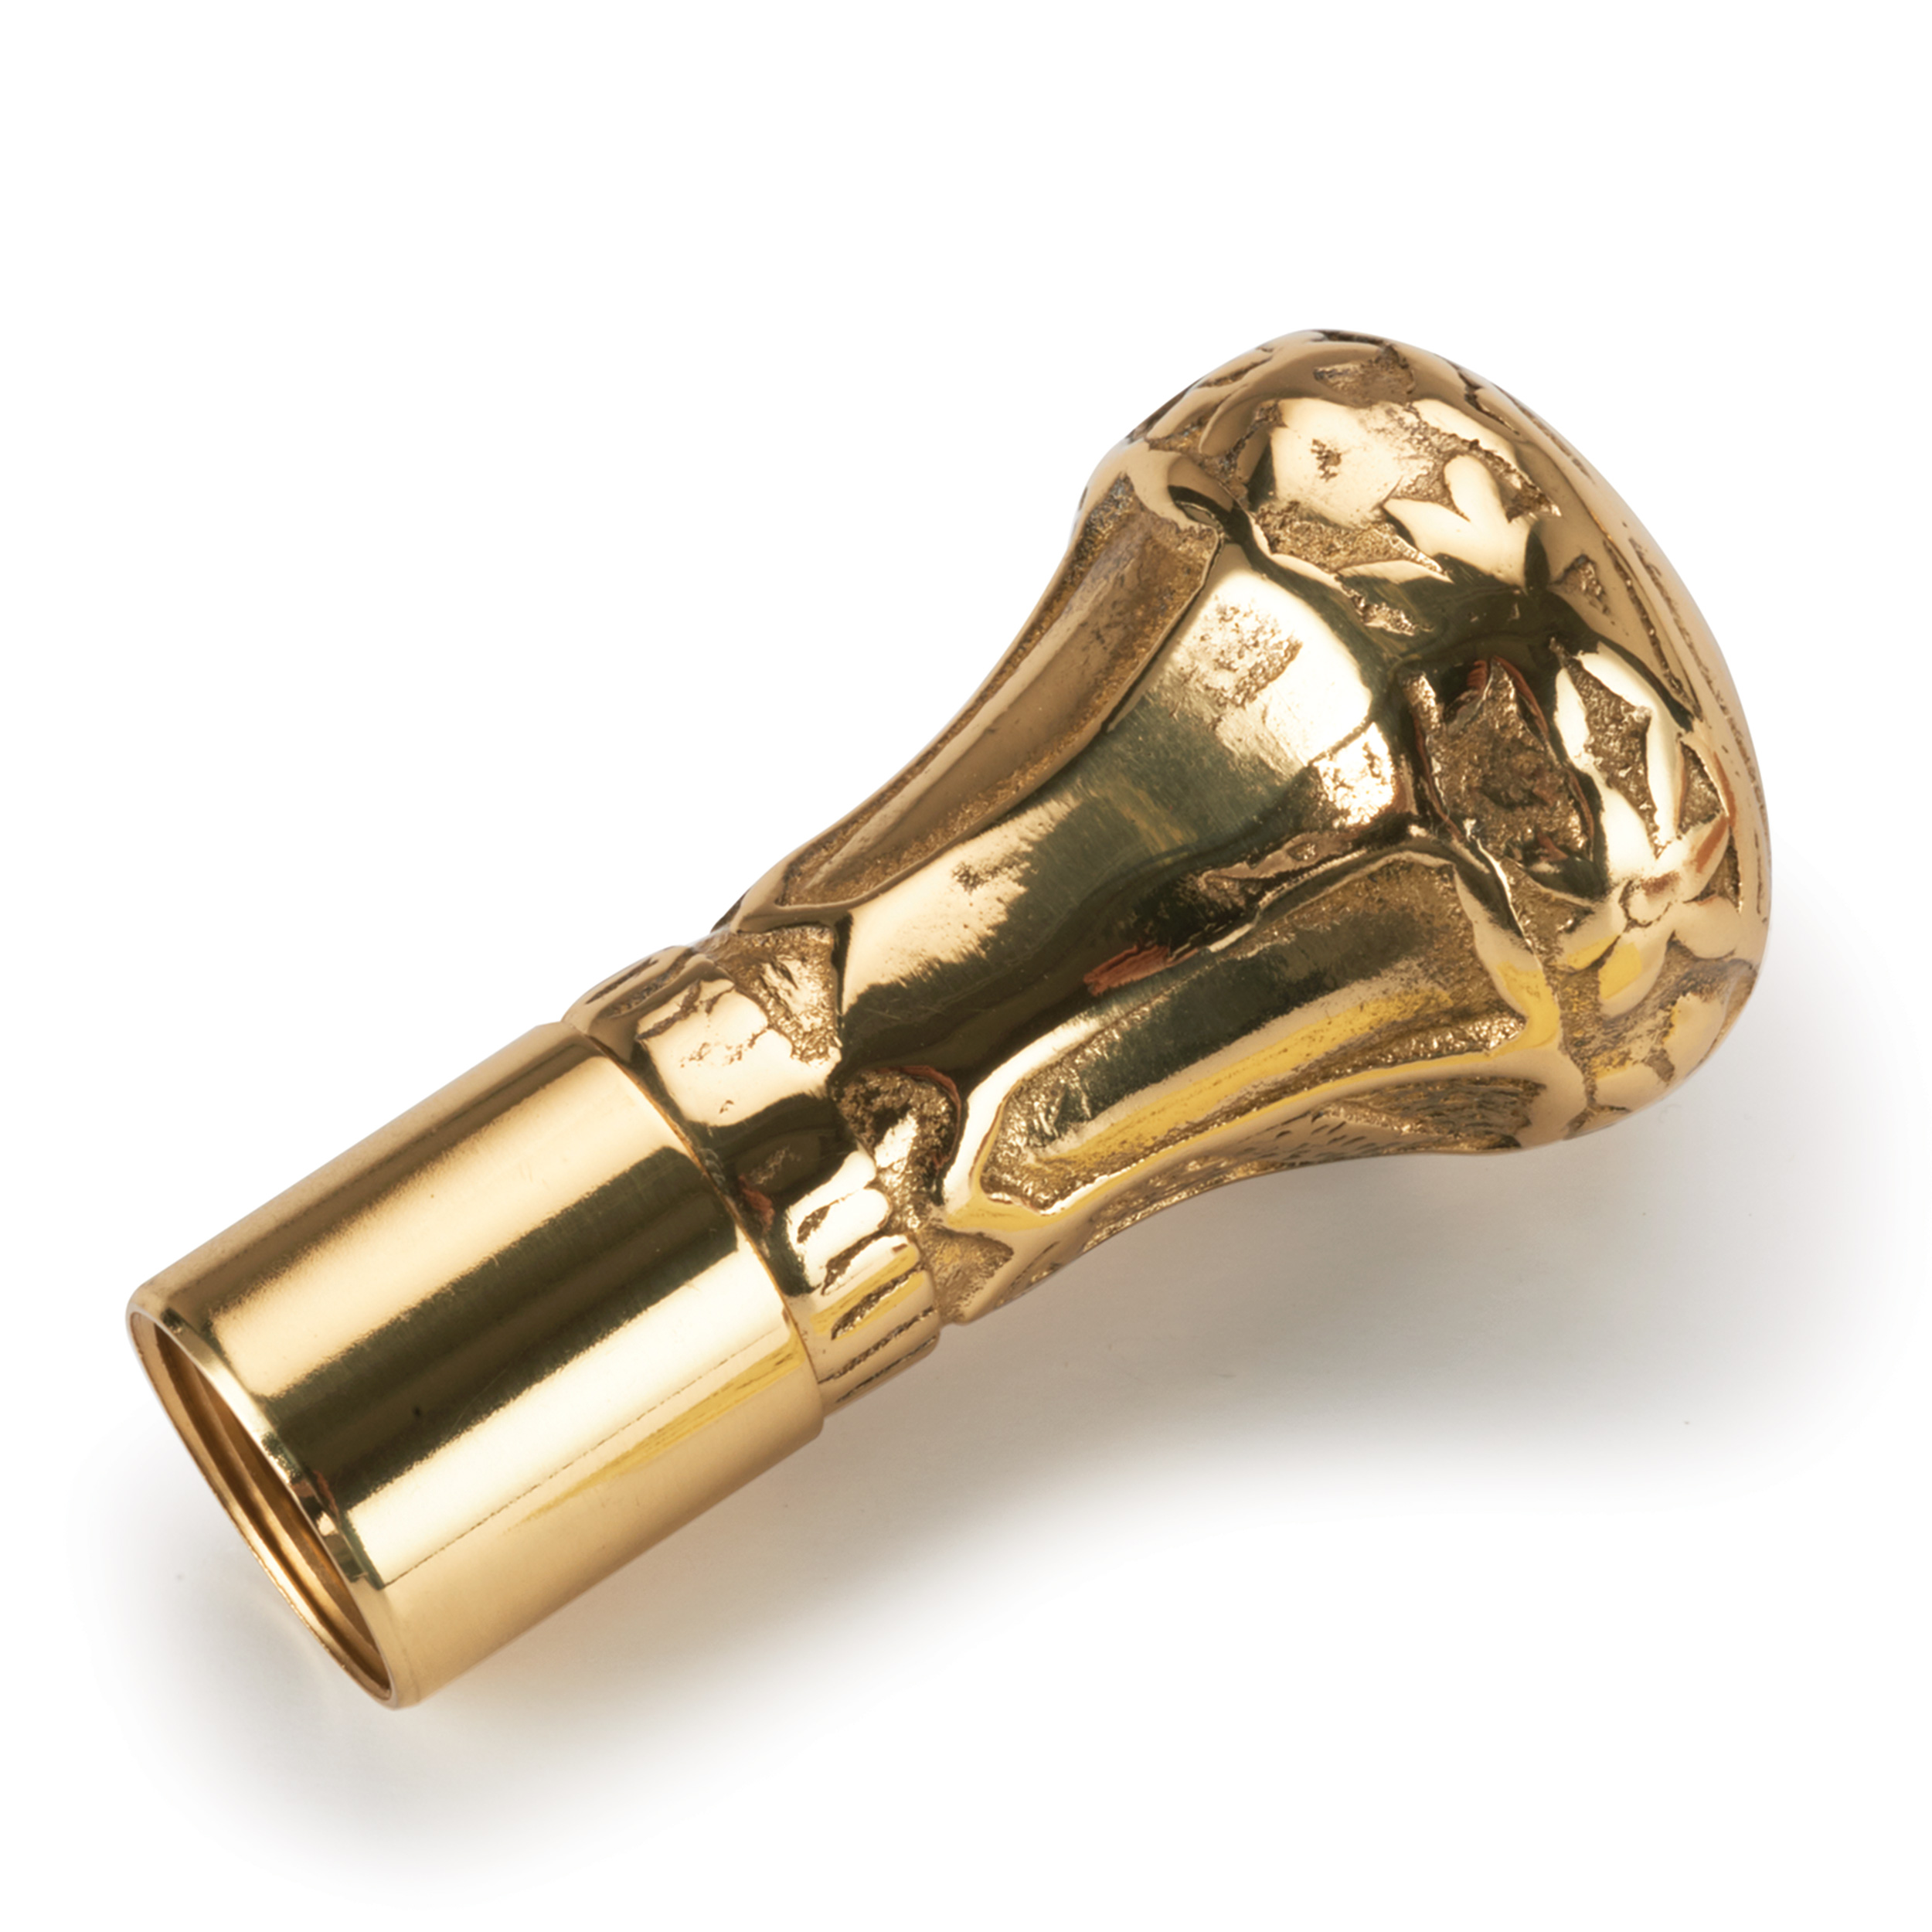 Woodriver Traditional Cane Handle - Brass